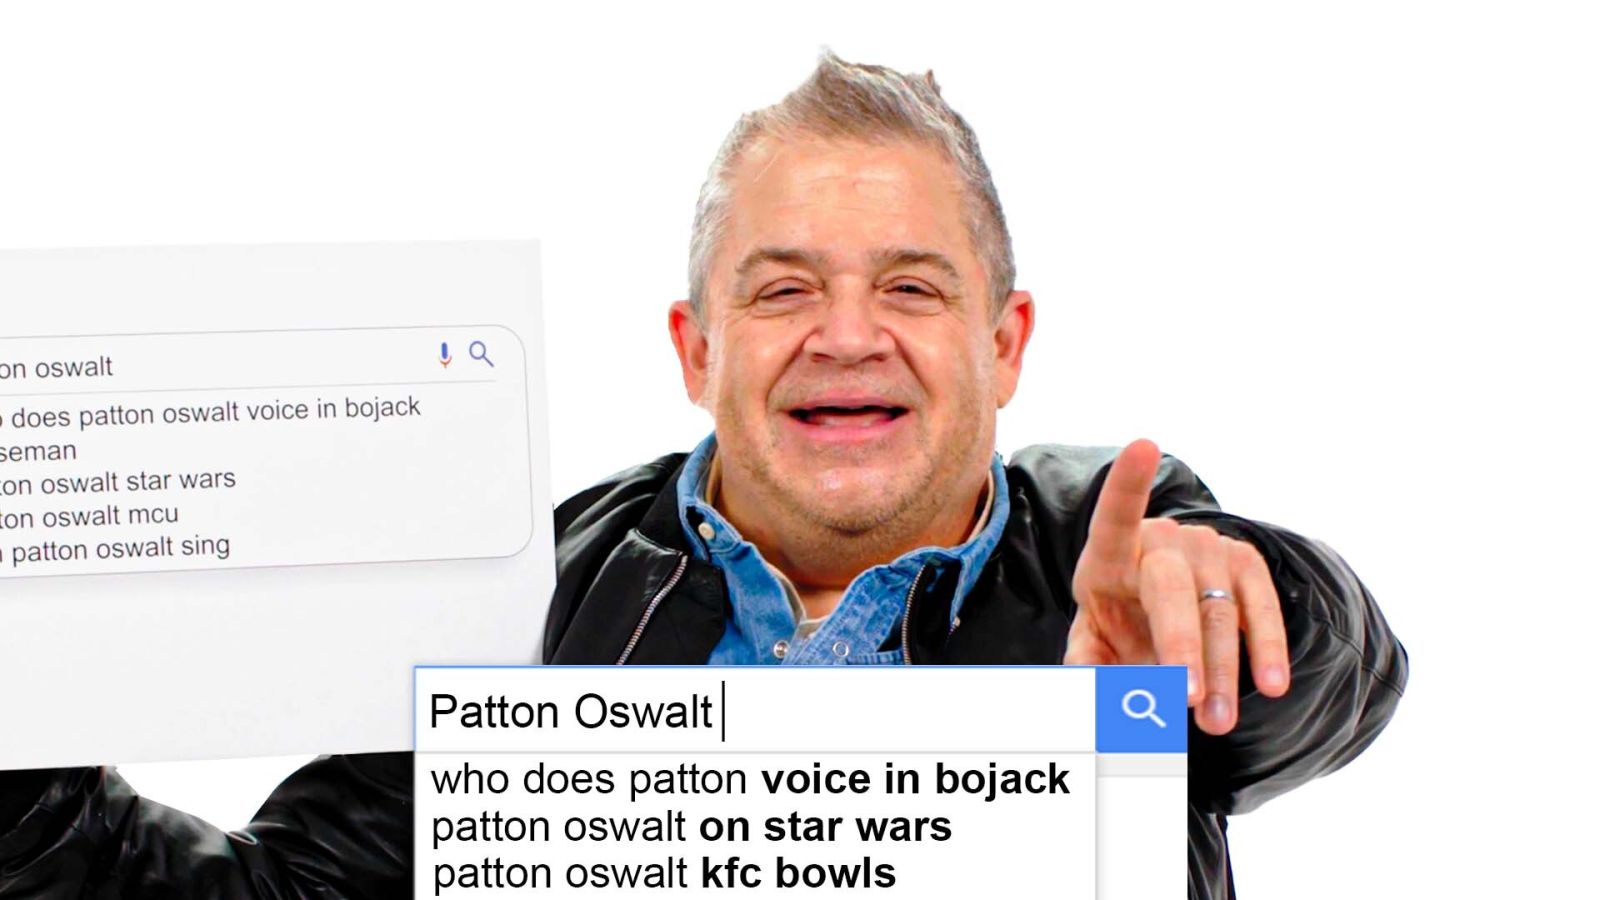 Patton Oswalt Answers The Web's Most Searched Questions